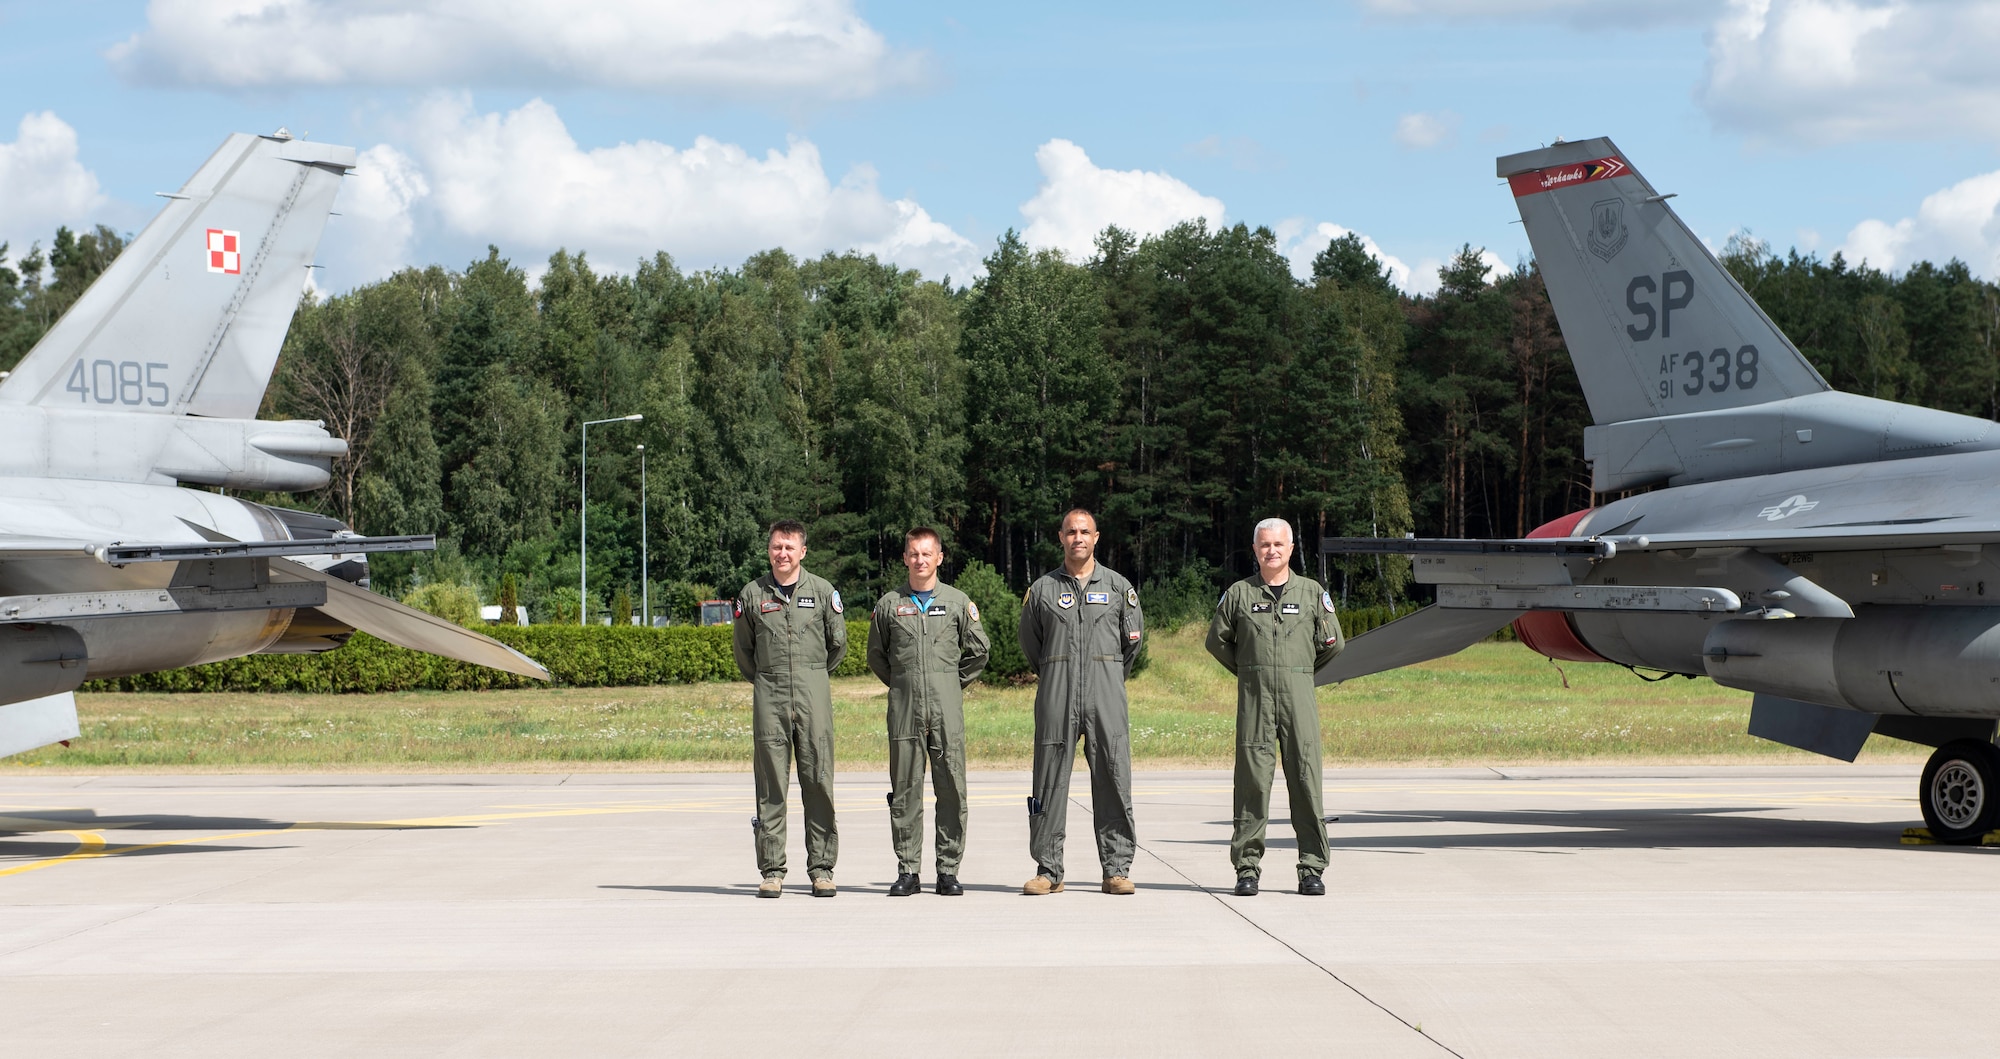 Starting far left, Polish air force Col. Tomasz Jatczak, 32nd Tactical Air Base commander, Brig. Gen. Iteneusz Nowak, 2nd Tactical Air Wing commander, U.S. Air Force Brig. Gen. Adrian Spain, United States Air Forces in Europe and Air Forces Africa director of plans, programs and analyses, and Polish air force Maj. Gen. Jacek Pszczoła, inspector of the Polish air force, pose in front of a static display, August 24, 2020, at Łask AB, Poland. The U.S. and Polish partnership is critical in light of growing security challenges, and opportunities to share perspectives and integrate help strengthen this relationship. (U.S. Air Force photo by Senior Airman Melody W. Howley)